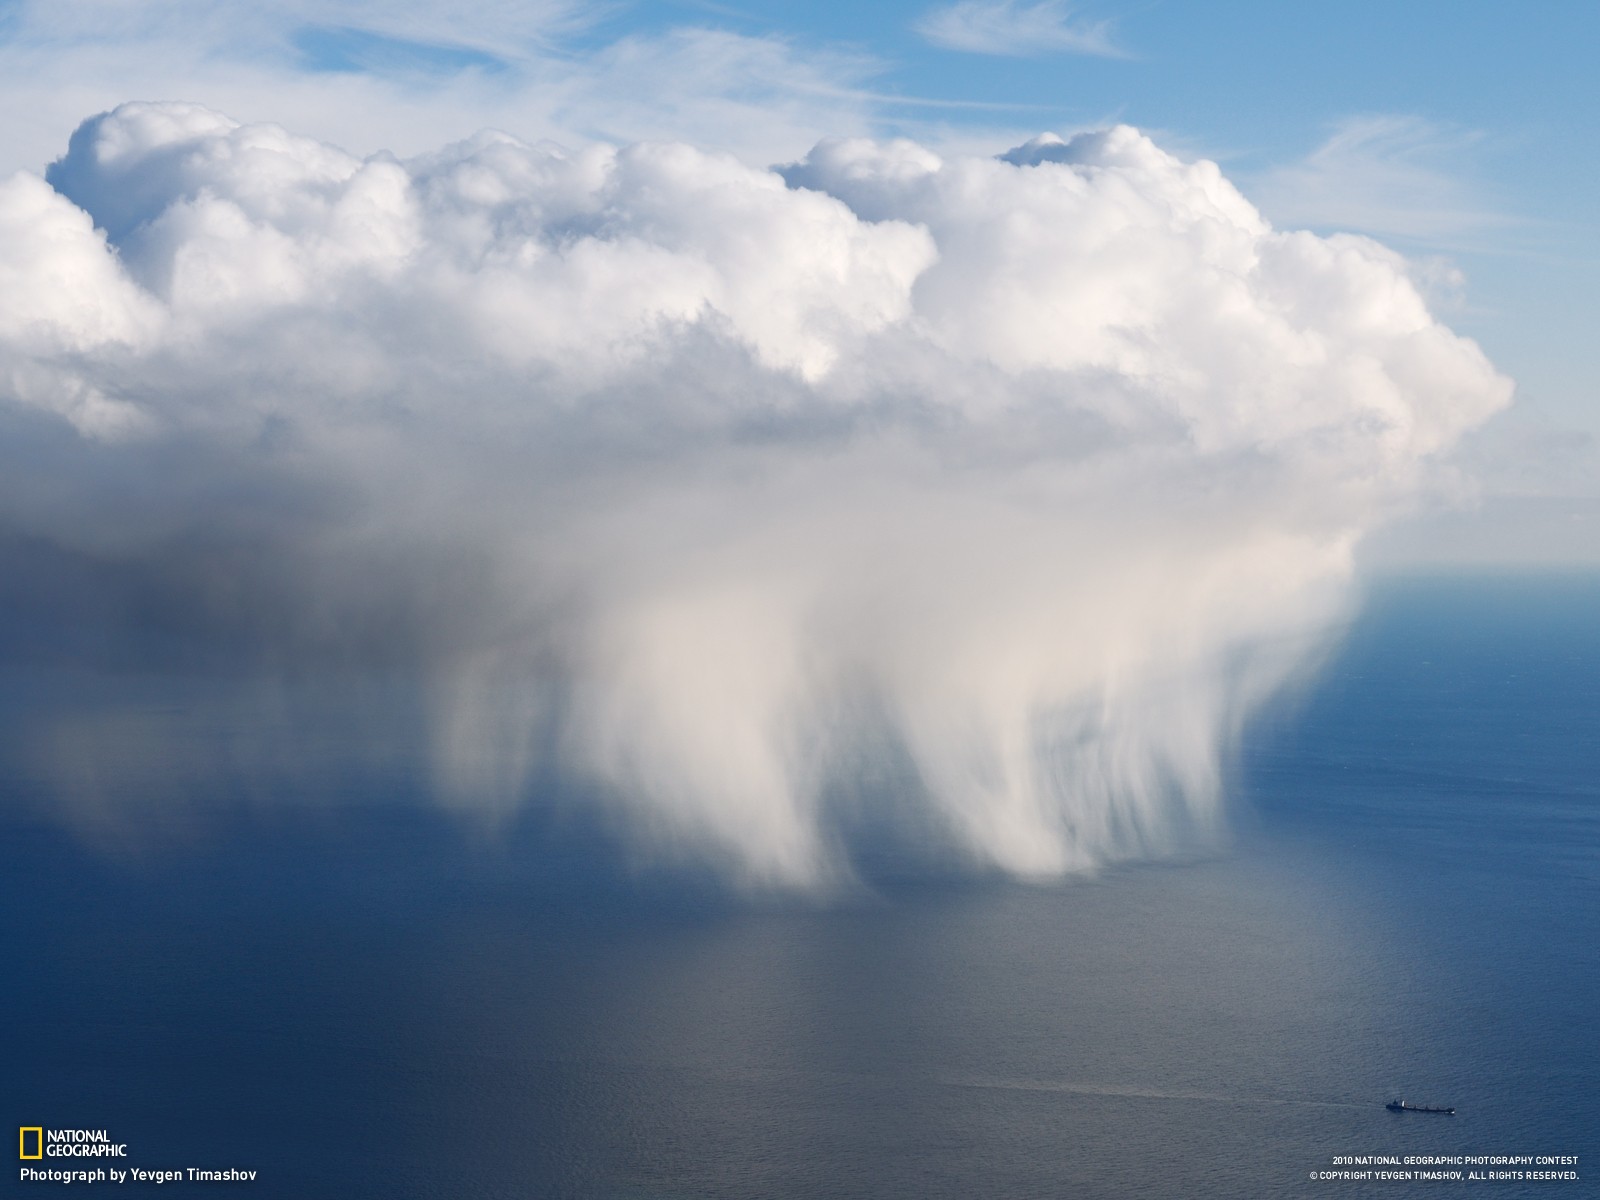 General 1600x1200 National Geographic sea clouds rain heights storm sky nature 2010 (Year) aerial view